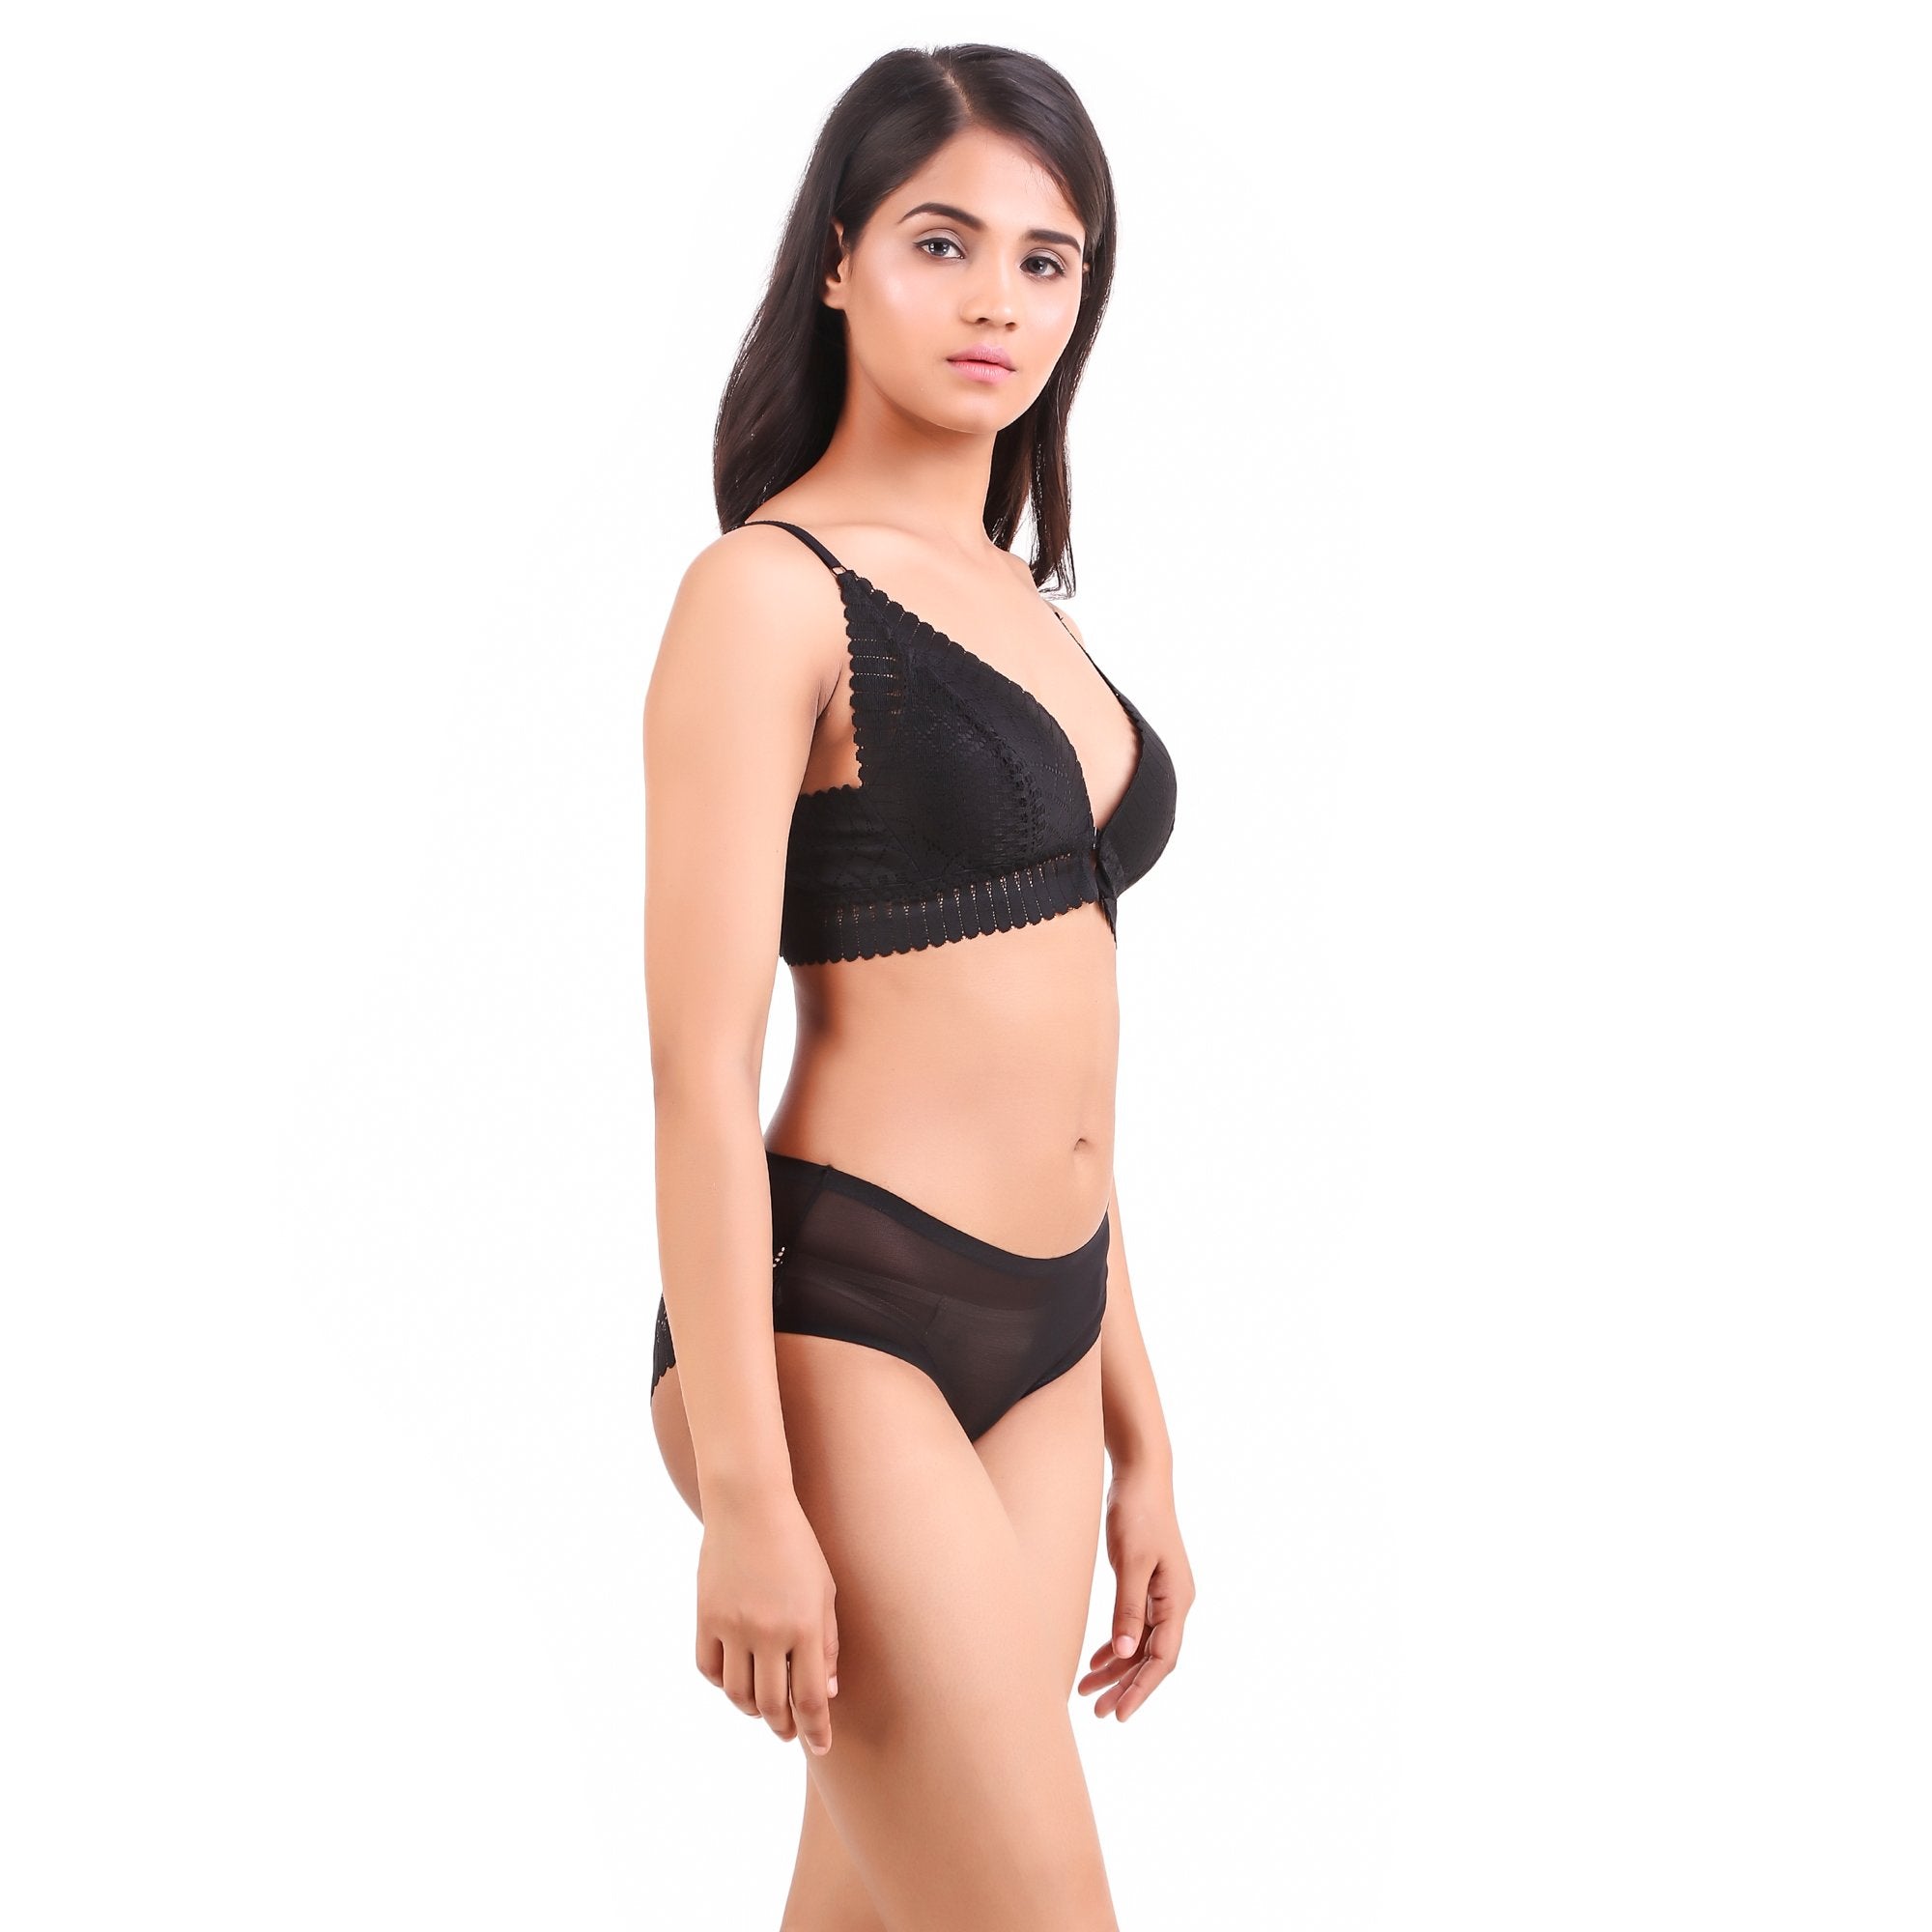 AXTZH-XBRA033 Soft cup non wired bra with boy short panty set